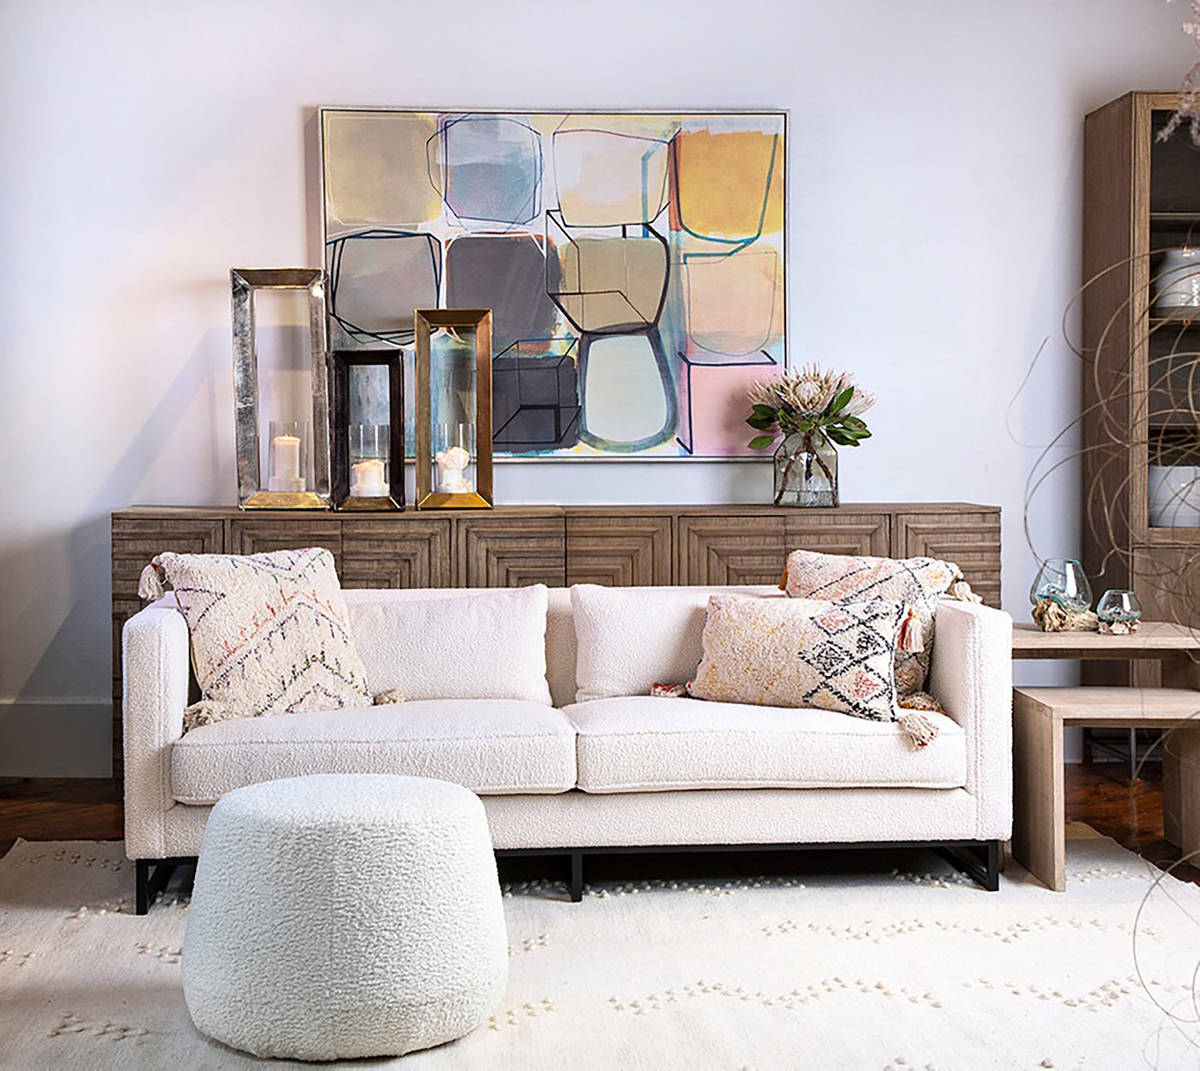 Dovetail's Lynette sofa, made with a white poly blend fabric and metal base, is paired with its ...